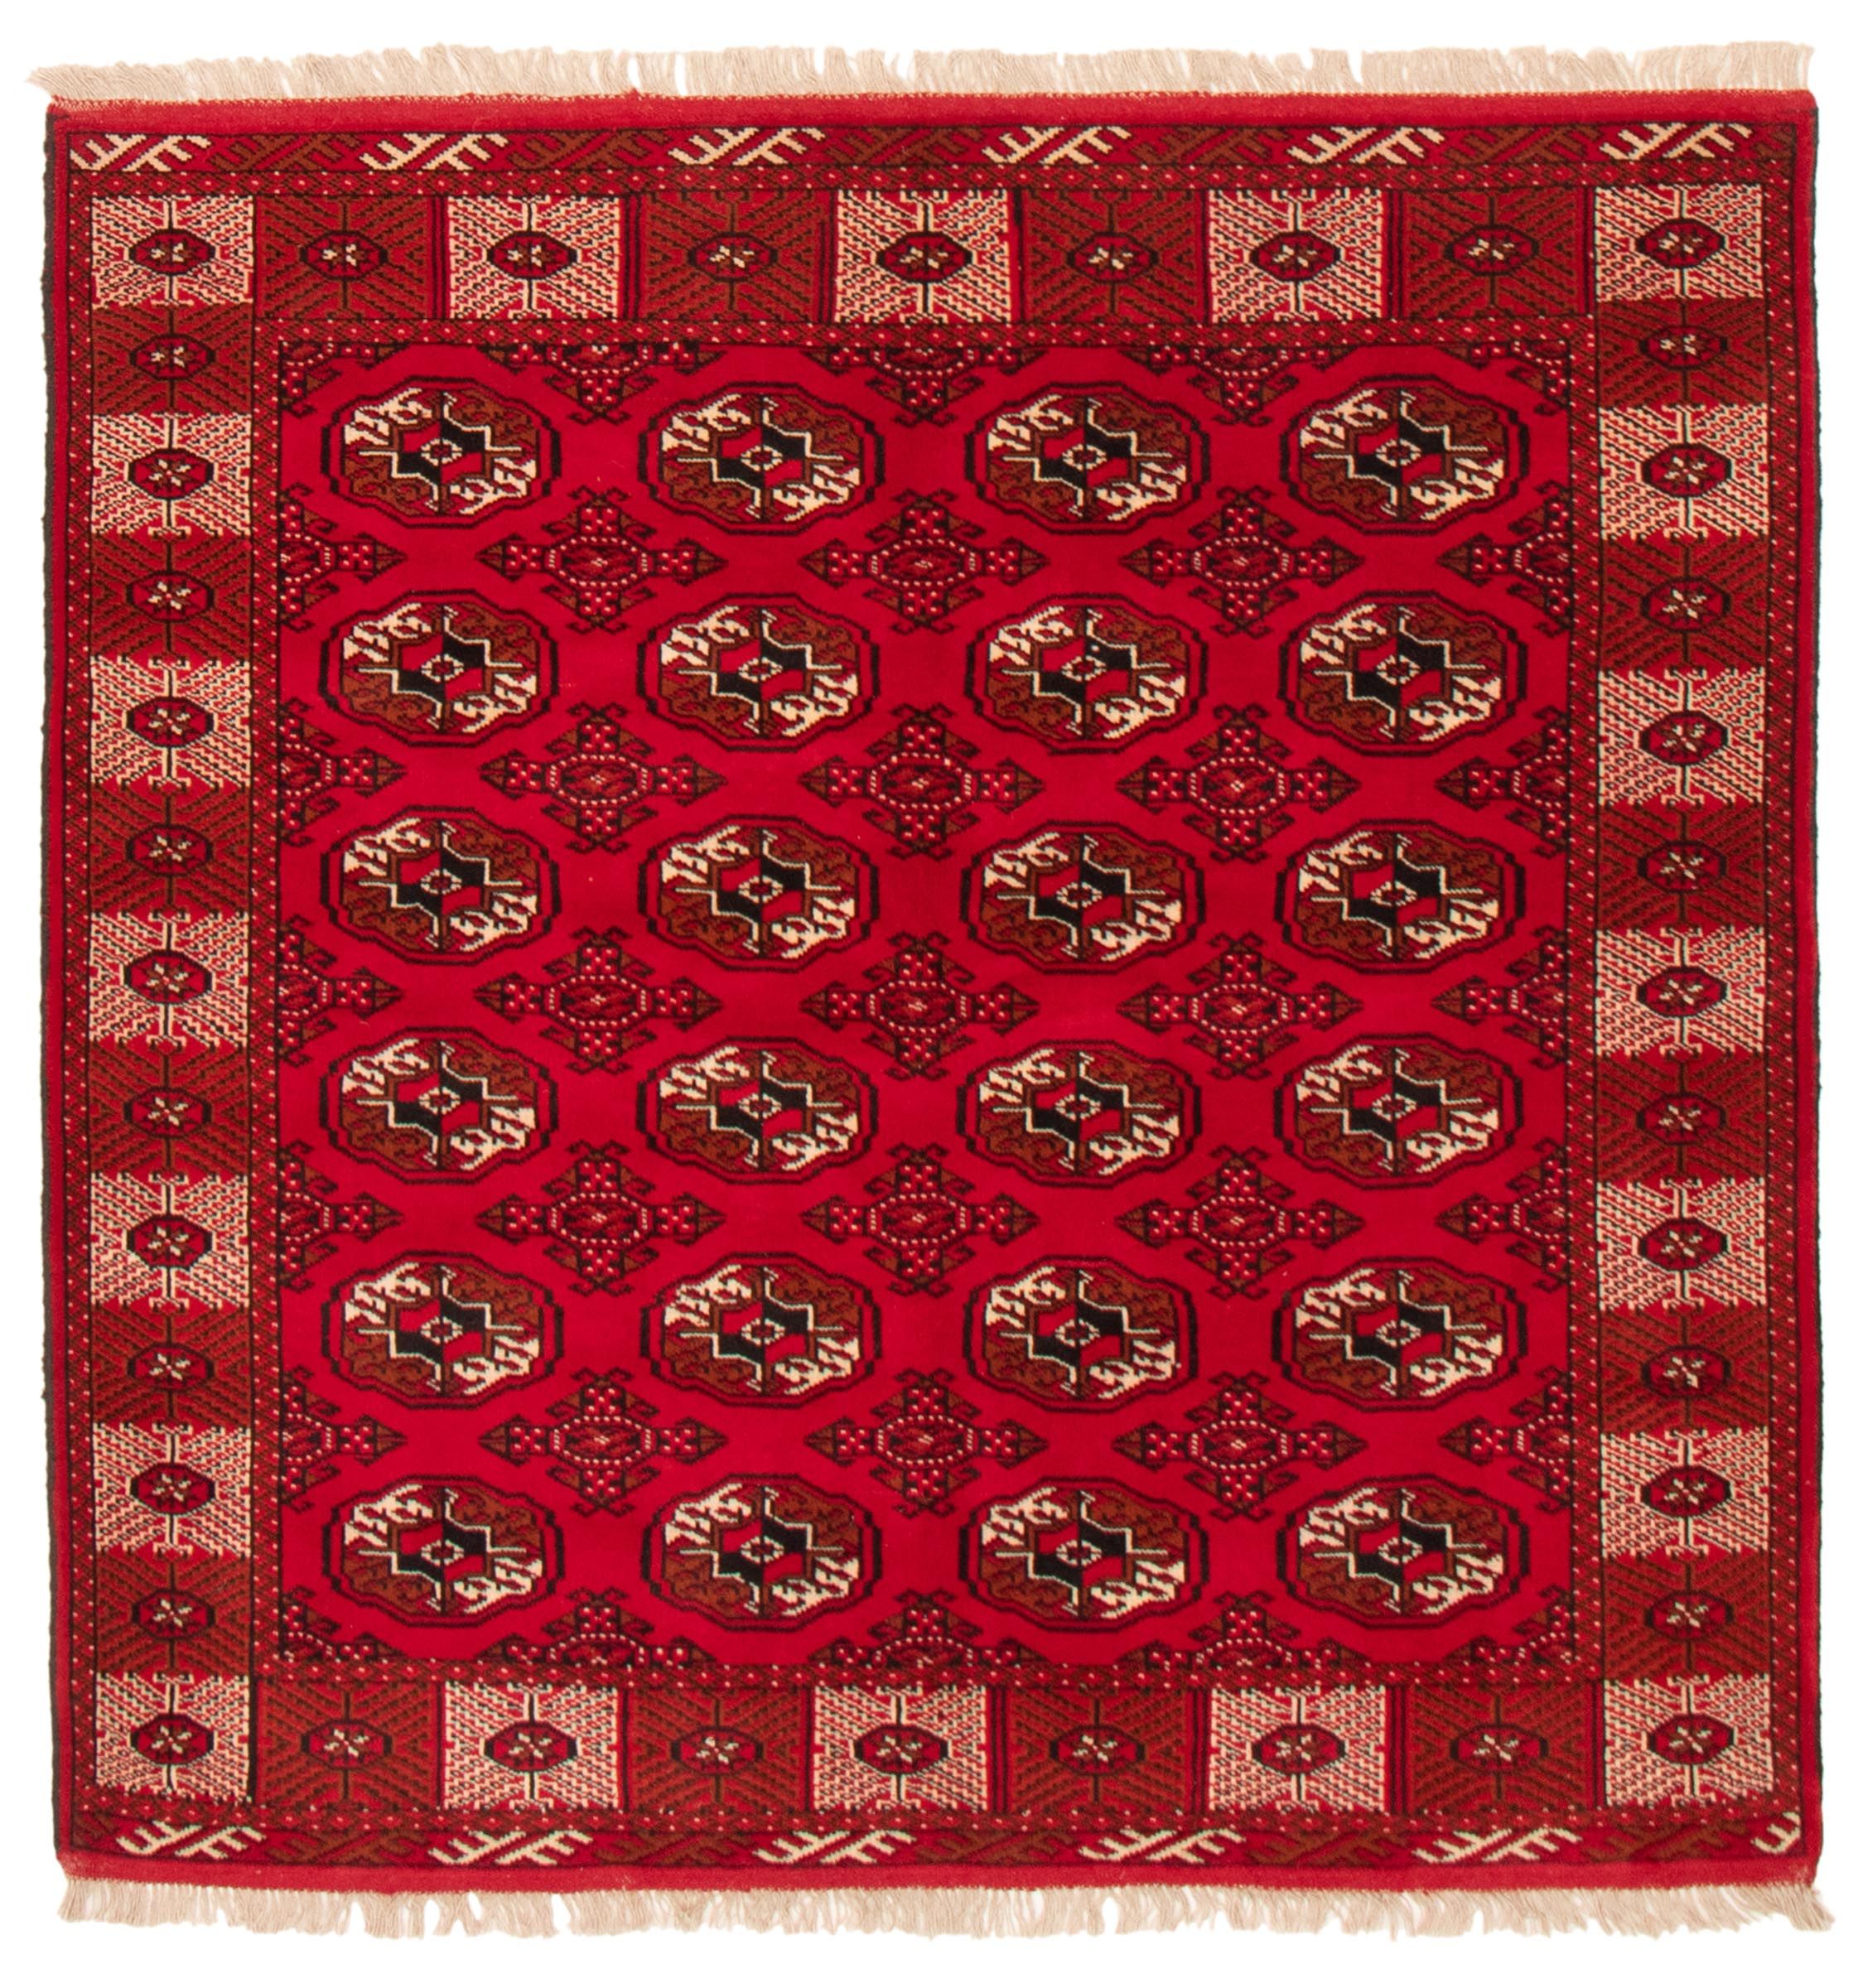 eCarpet Gallery Area Rug for Living Room Bedroom Bold and Colorful Bordered Brown Kilim 3'6 x 6'5 346297 Hand-Knotted Wool Rug 